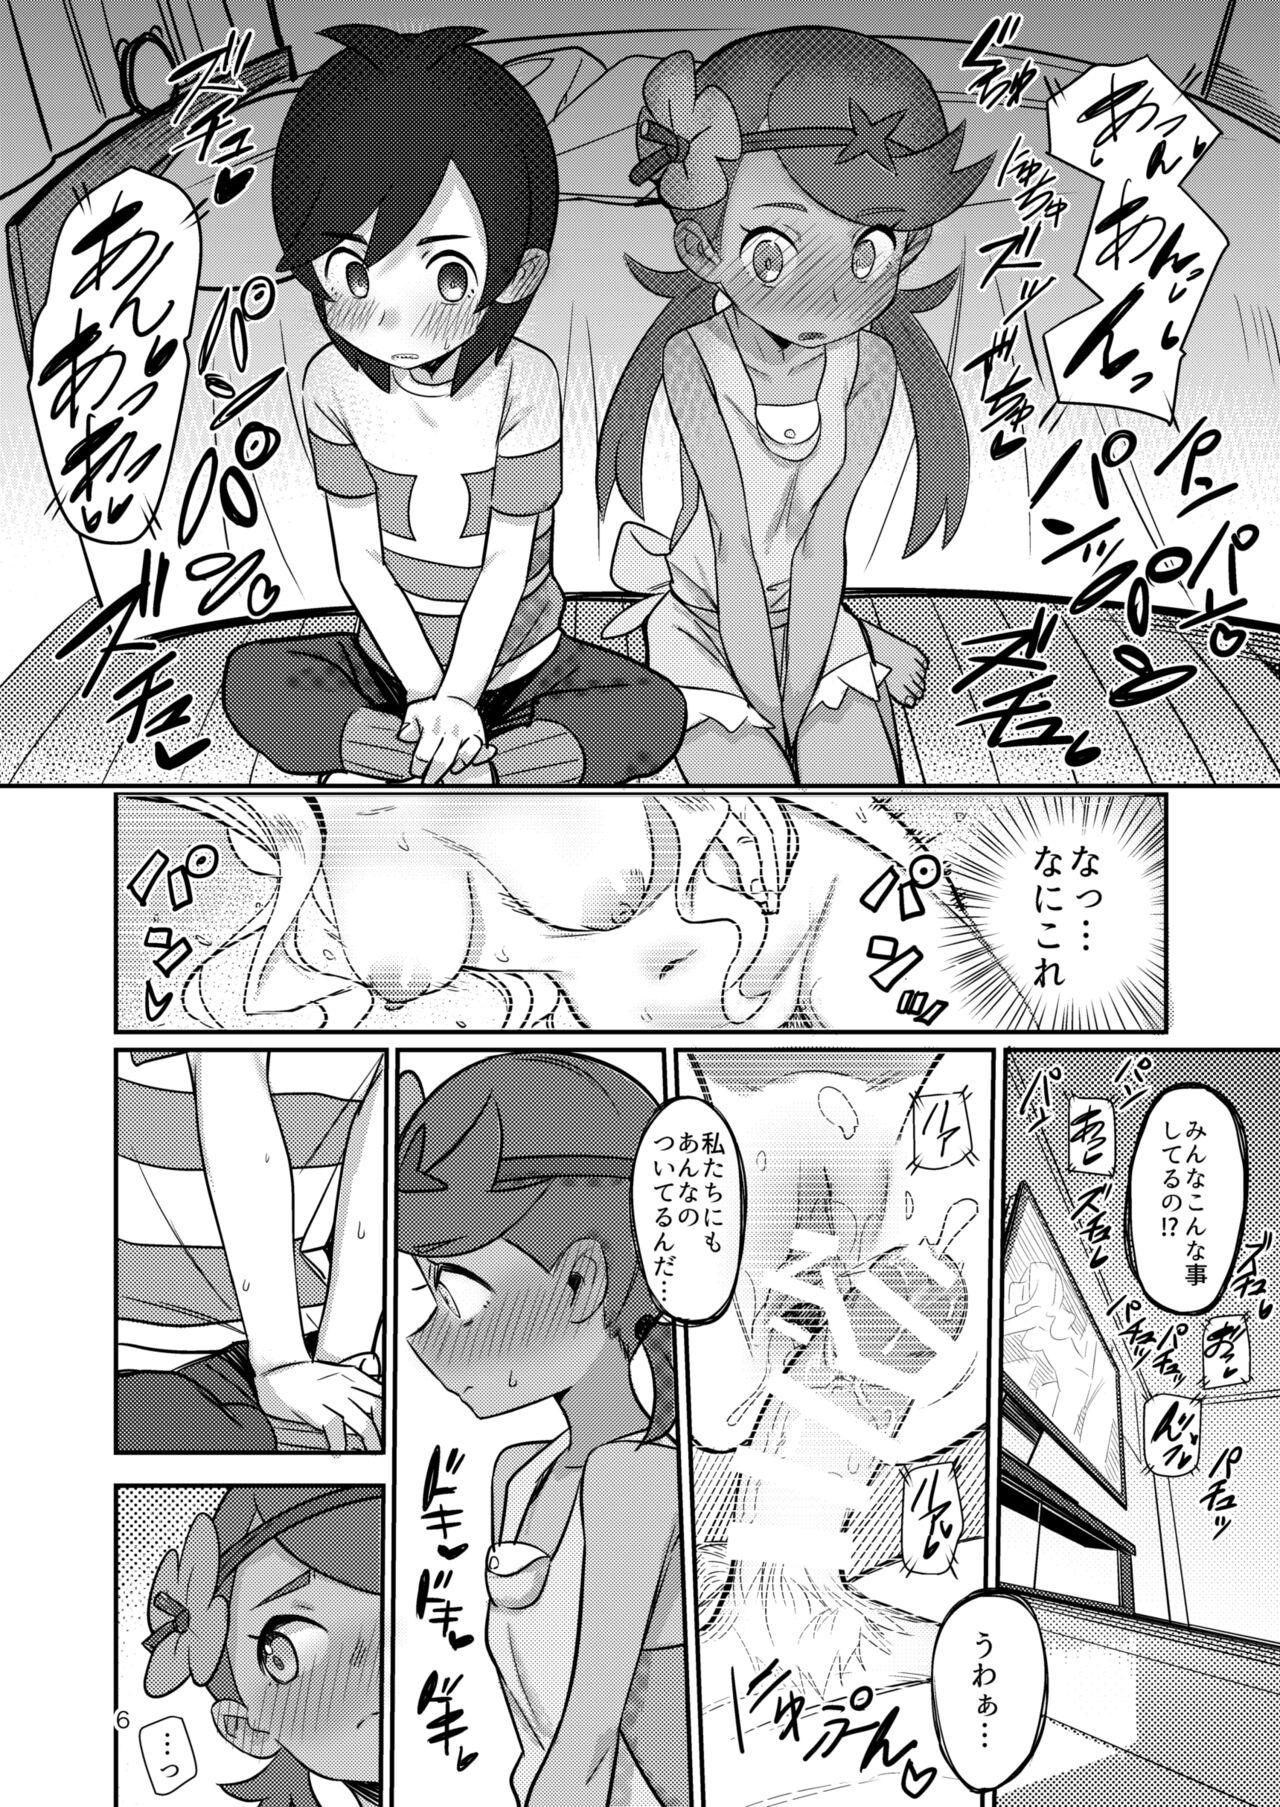 Lolicon ALOLA NIGHT - Pokemon | pocket monsters Missionary Porn - Page 5